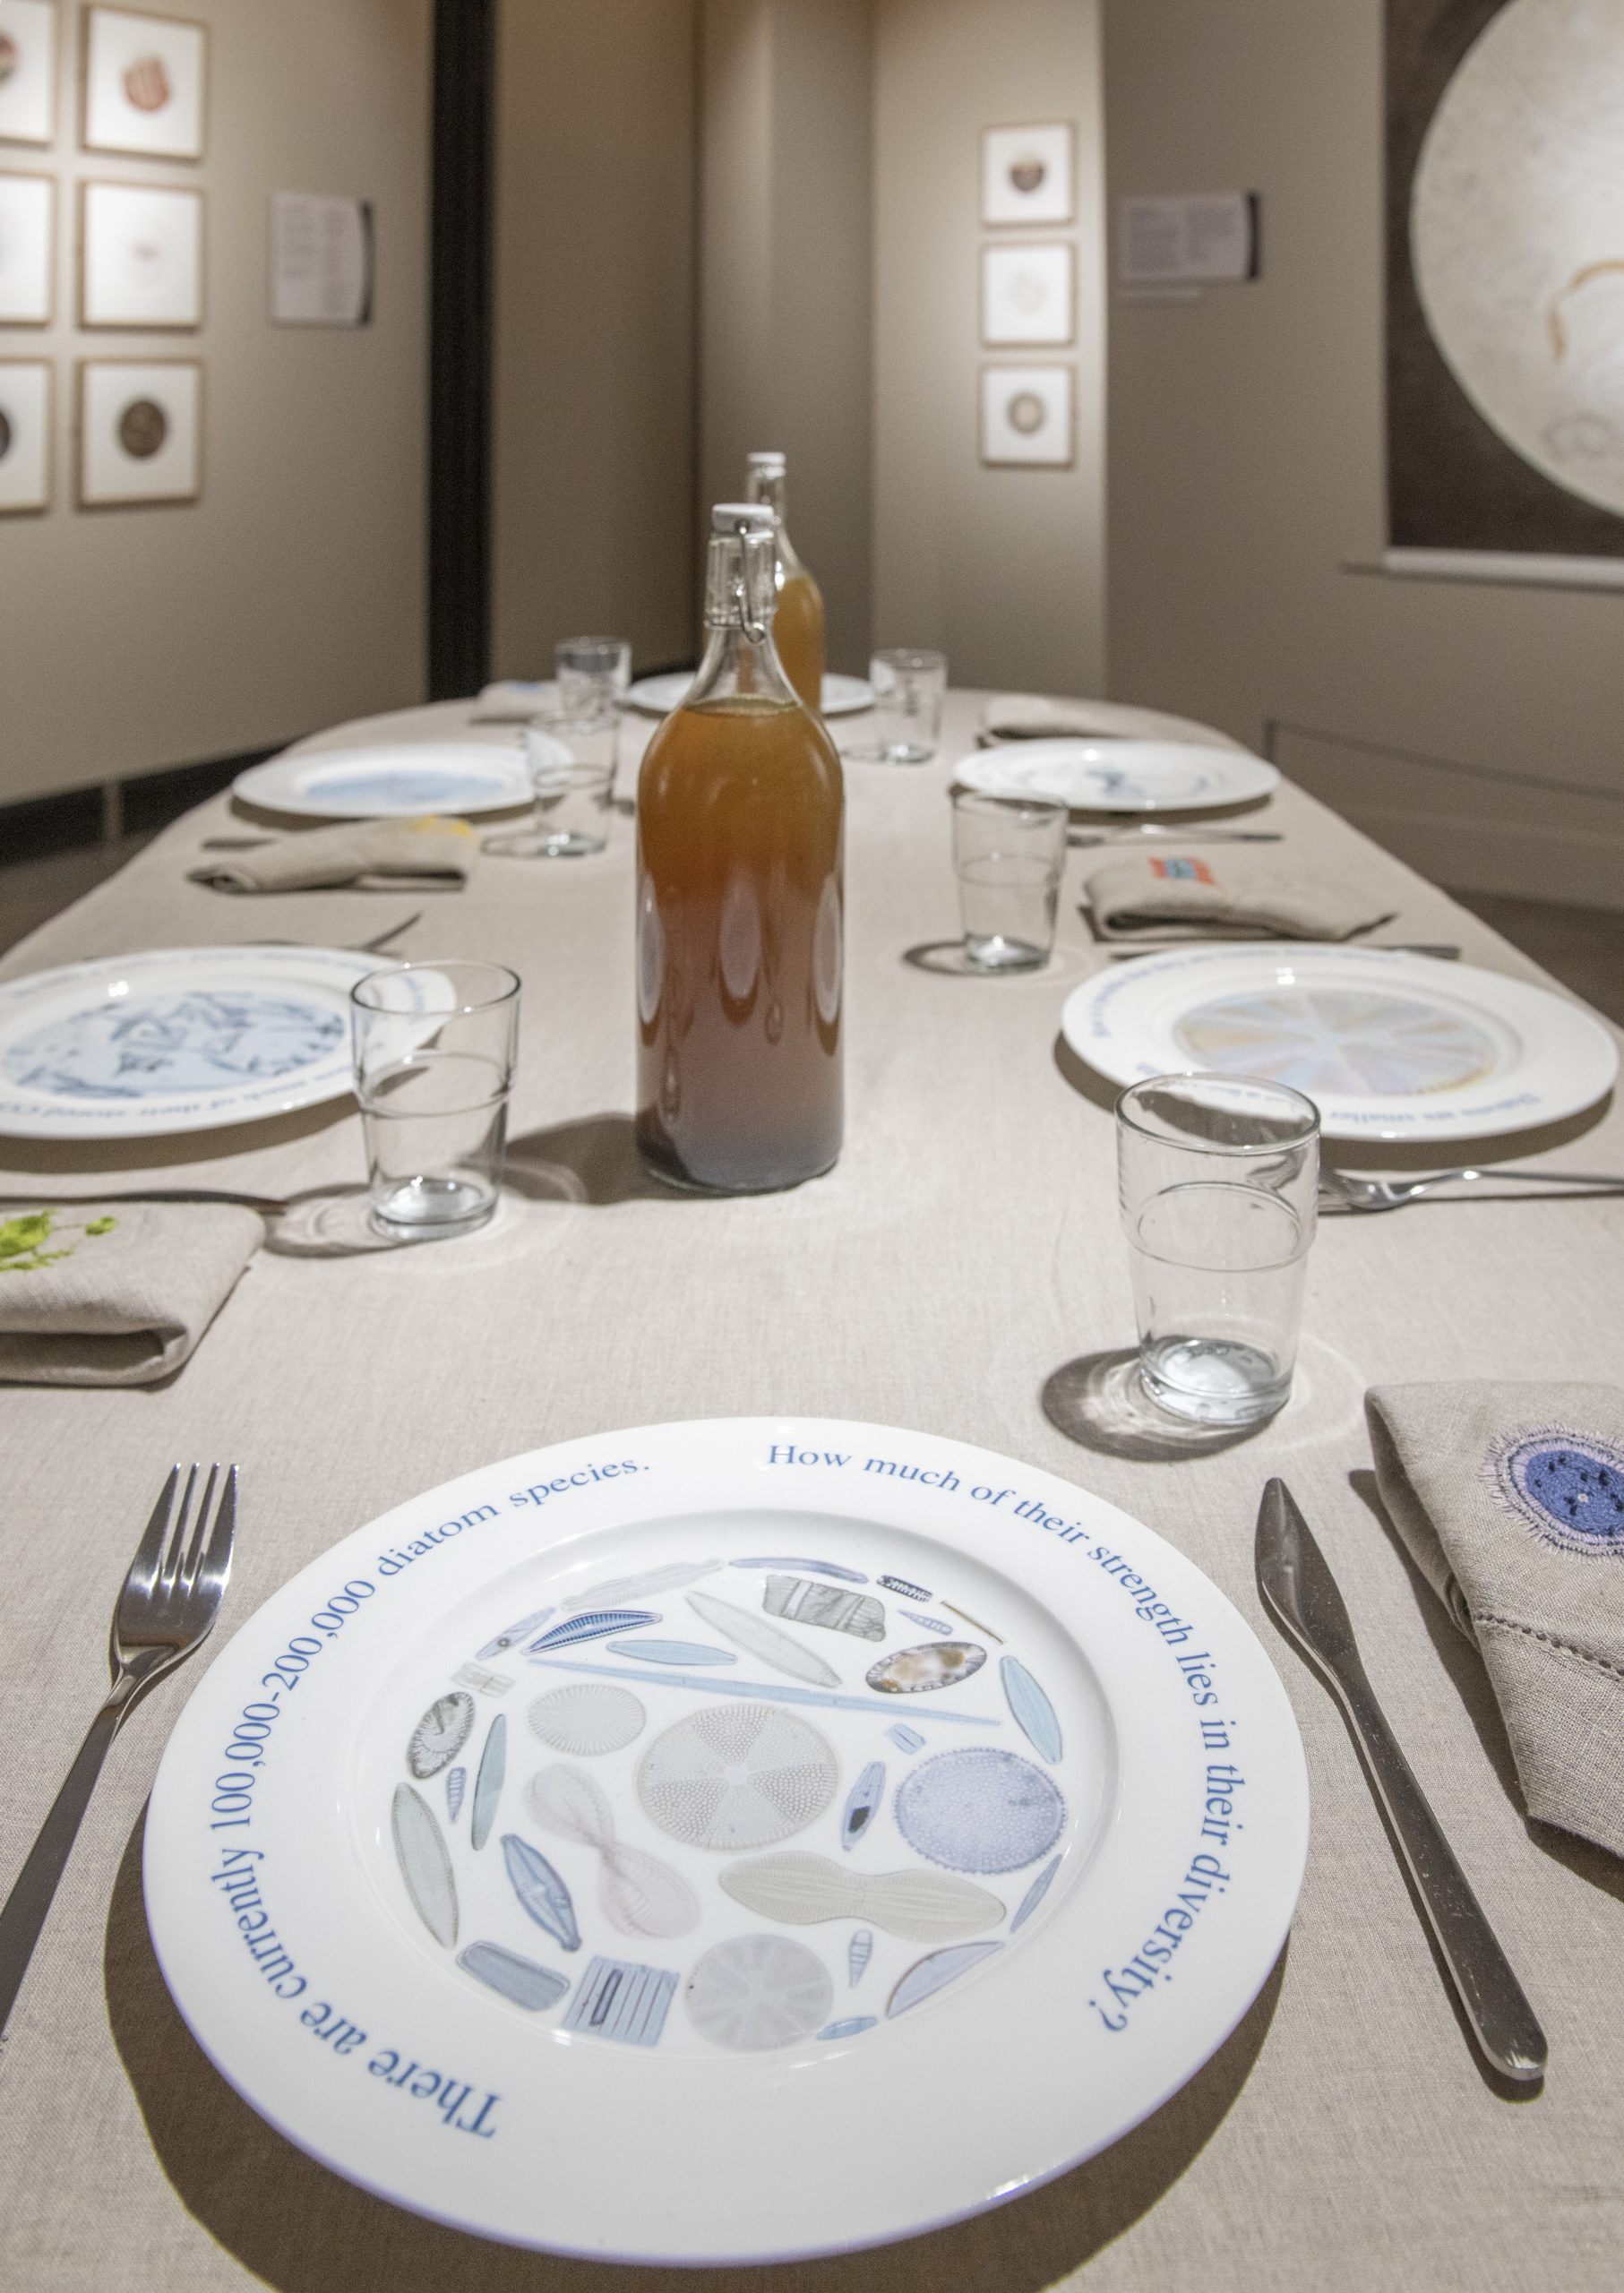 View of table set with artwork tableware decorated with microbiology from the soil.